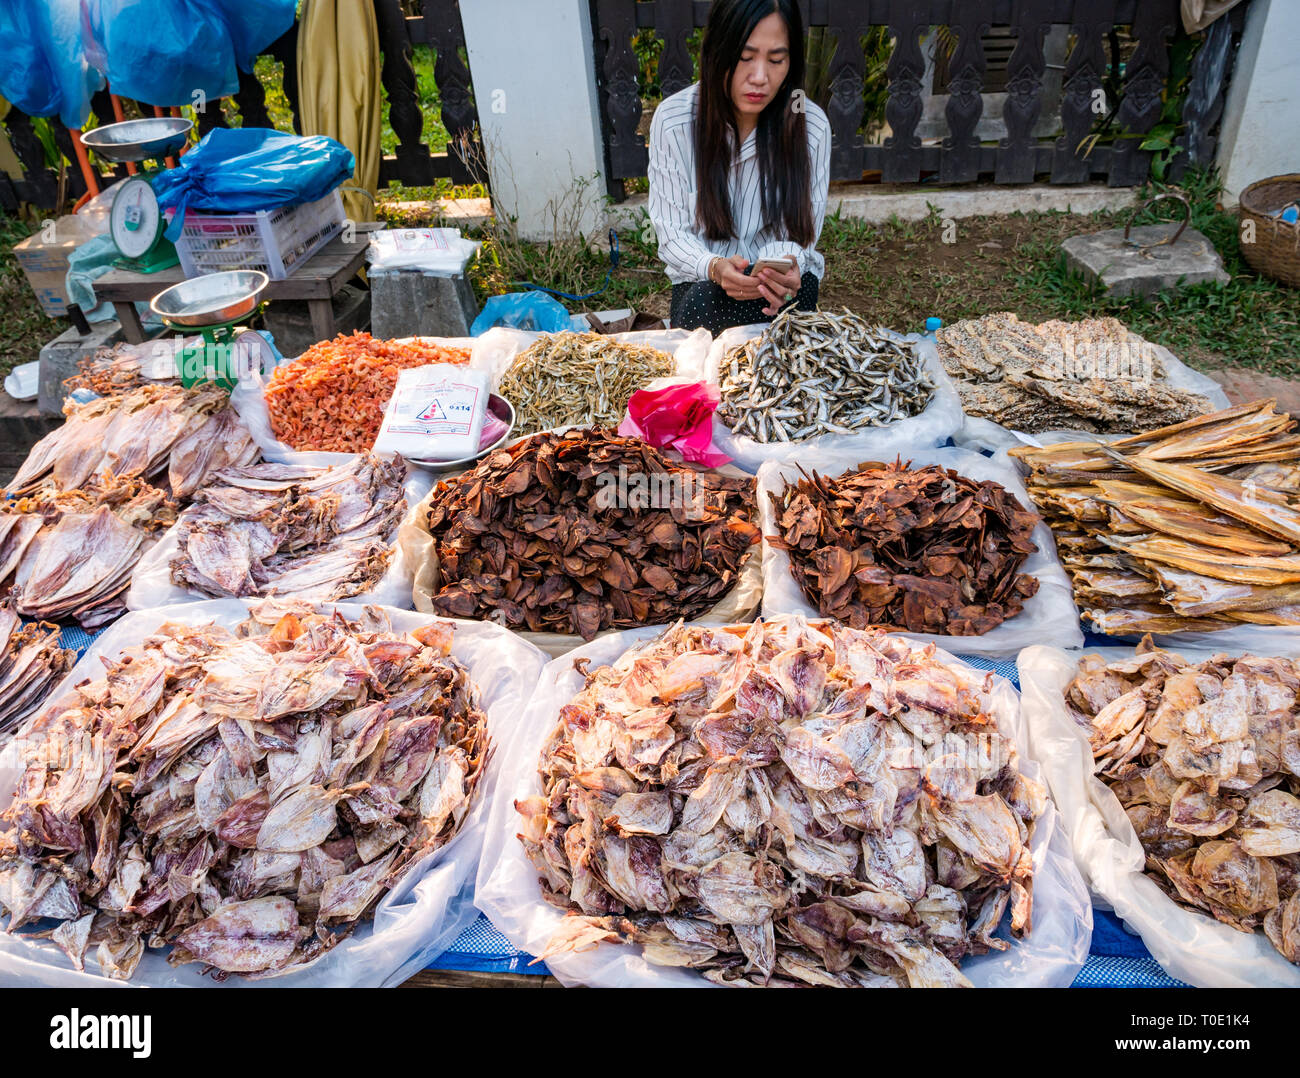 Woman stall holder looking at mobile phone with dried fish displayed for sale, morning street food market, Luang Prabang, Laos, SE Asia Stock Photo